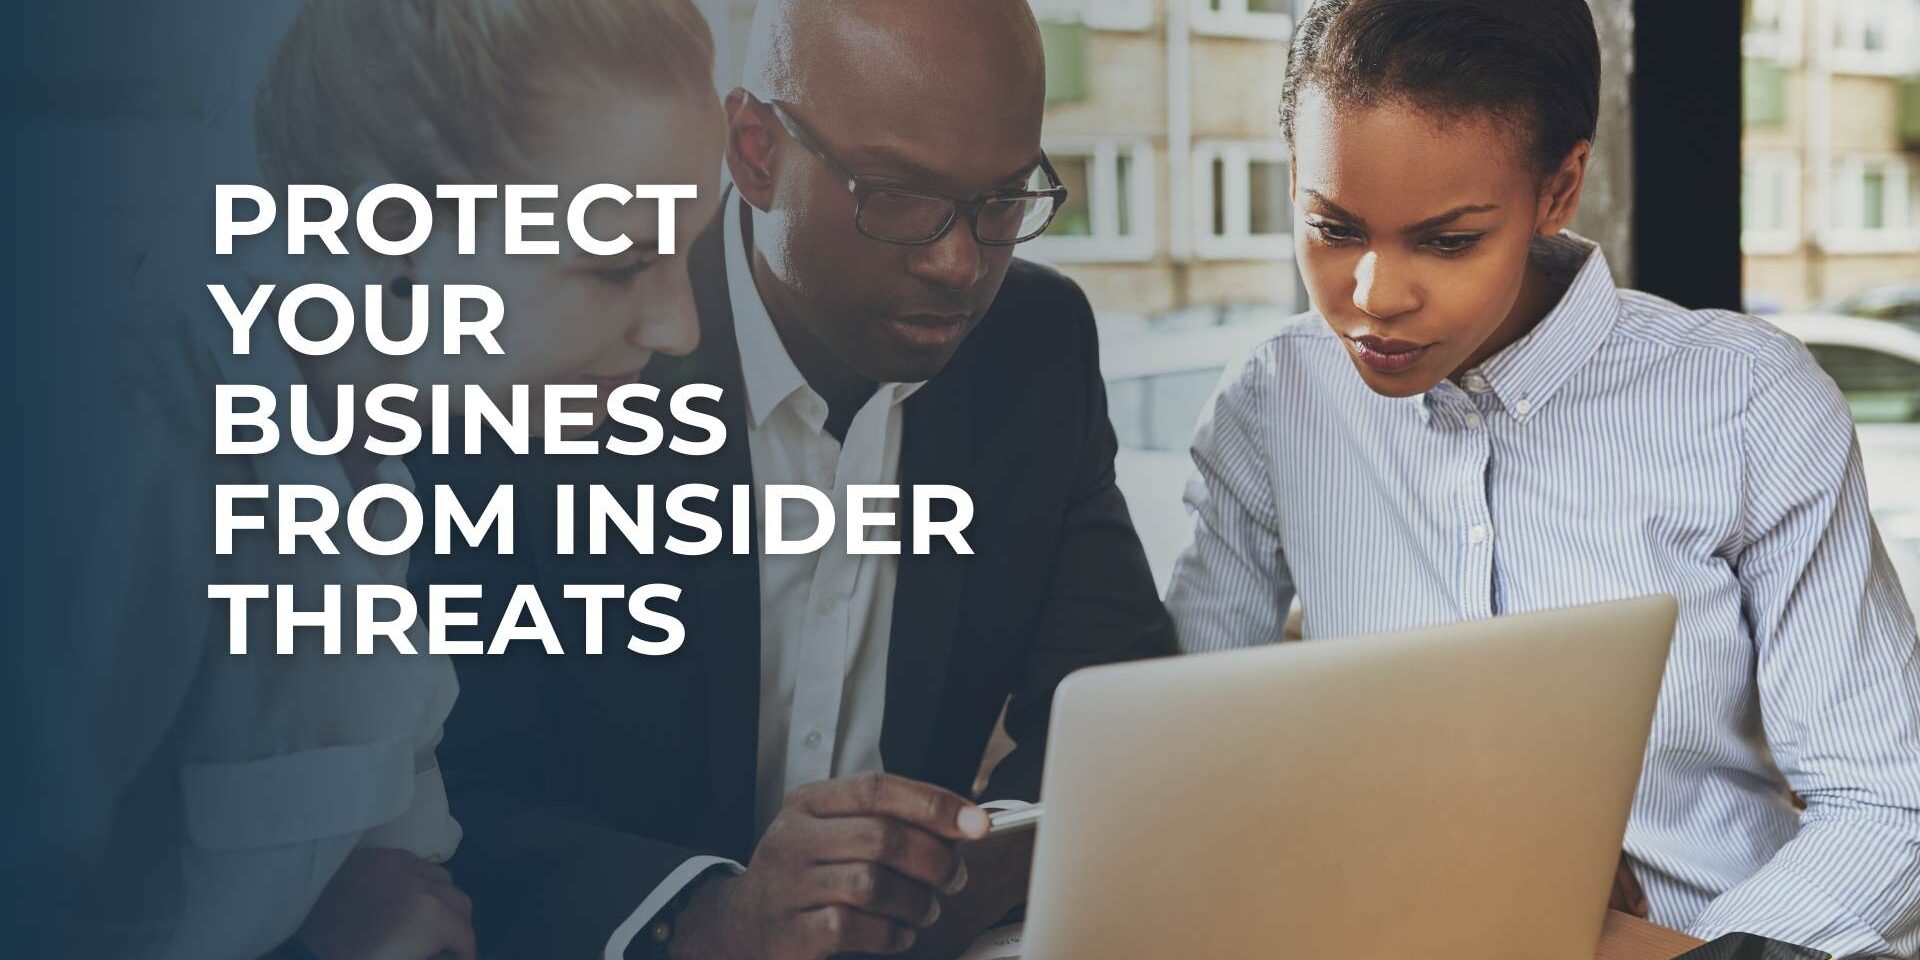 Protect Your Business from Insider Threats